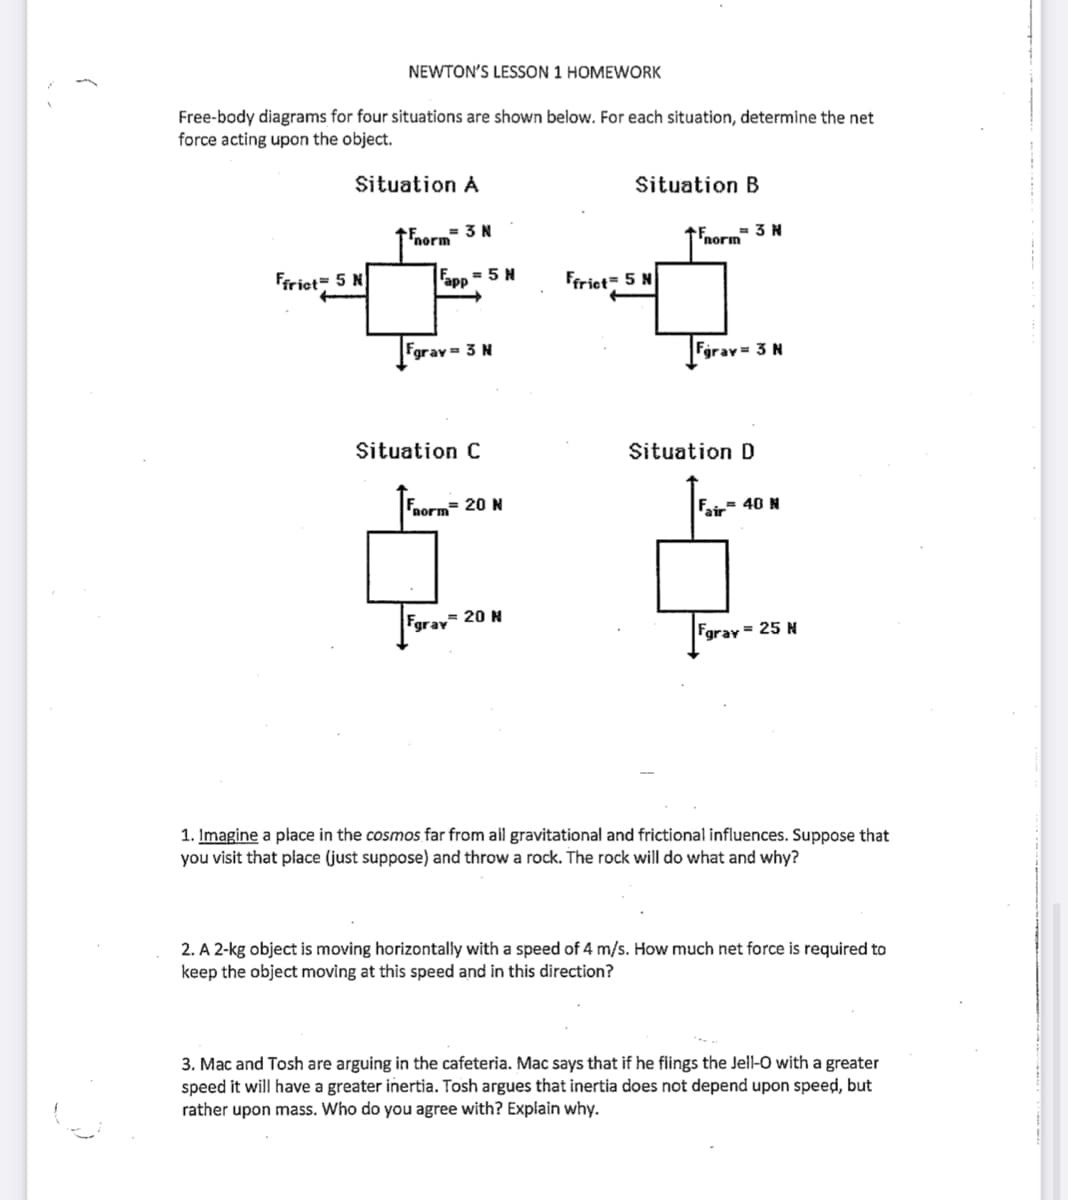 NEWTON'S LESSON 1 HOMEWORK
Free-body diagrams for four situations are shown below. For each situation, determine the net
force acting upon the object.
Situation A
Ffrict 5 N
= 3 N
Fnorm
app = 5 H
Fgray = 3 N
Situation C
Form= 20 N
Fgray= 20 N
Situation B
Ffrict 5 N
= 3 N
Fnorm
Fgrav= 3 N
Situation D
Fair 40 N
Fgray = 25 N
1. Imagine a place in the cosmos far from all gravitational and frictional influences. Suppose that
you visit that place (just suppose) and throw a rock. The rock will do what and why?
2. A 2-kg object is moving horizontally with a speed of 4 m/s. How much net force is required to
keep the object moving at this speed and in this direction?
3. Mac and Tosh are arguing in the cafeteria. Mac says that if he flings the Jell-O with a greater
speed it will have a greater inertia. Tosh argues that inertia does not depend upon speed, but
rather upon mass. Who do you agree with? Explain why.